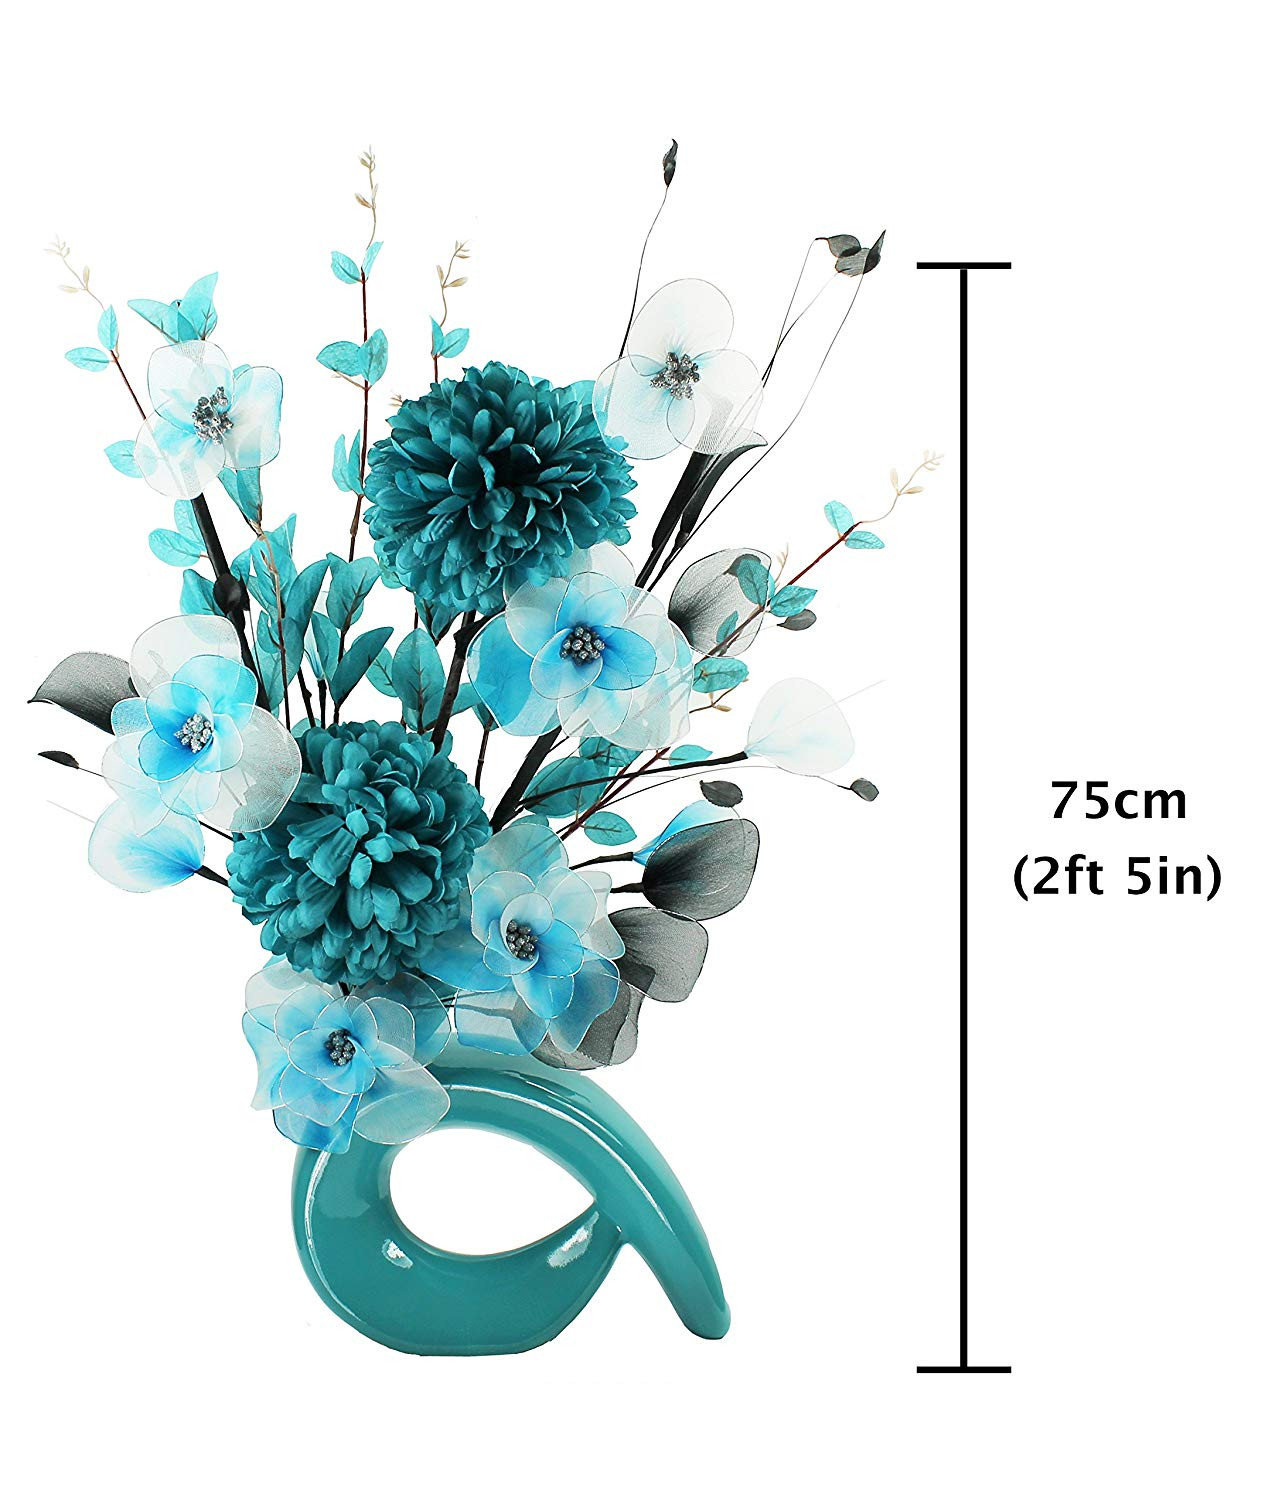 10 Best Small Artificial Flowers In Vase 2024 free download small artificial flowers in vase of turquoise blue vase with teal blue and white artificial flowers regarding turquoise blue vase with teal blue and white artificial flowers ornaments for li